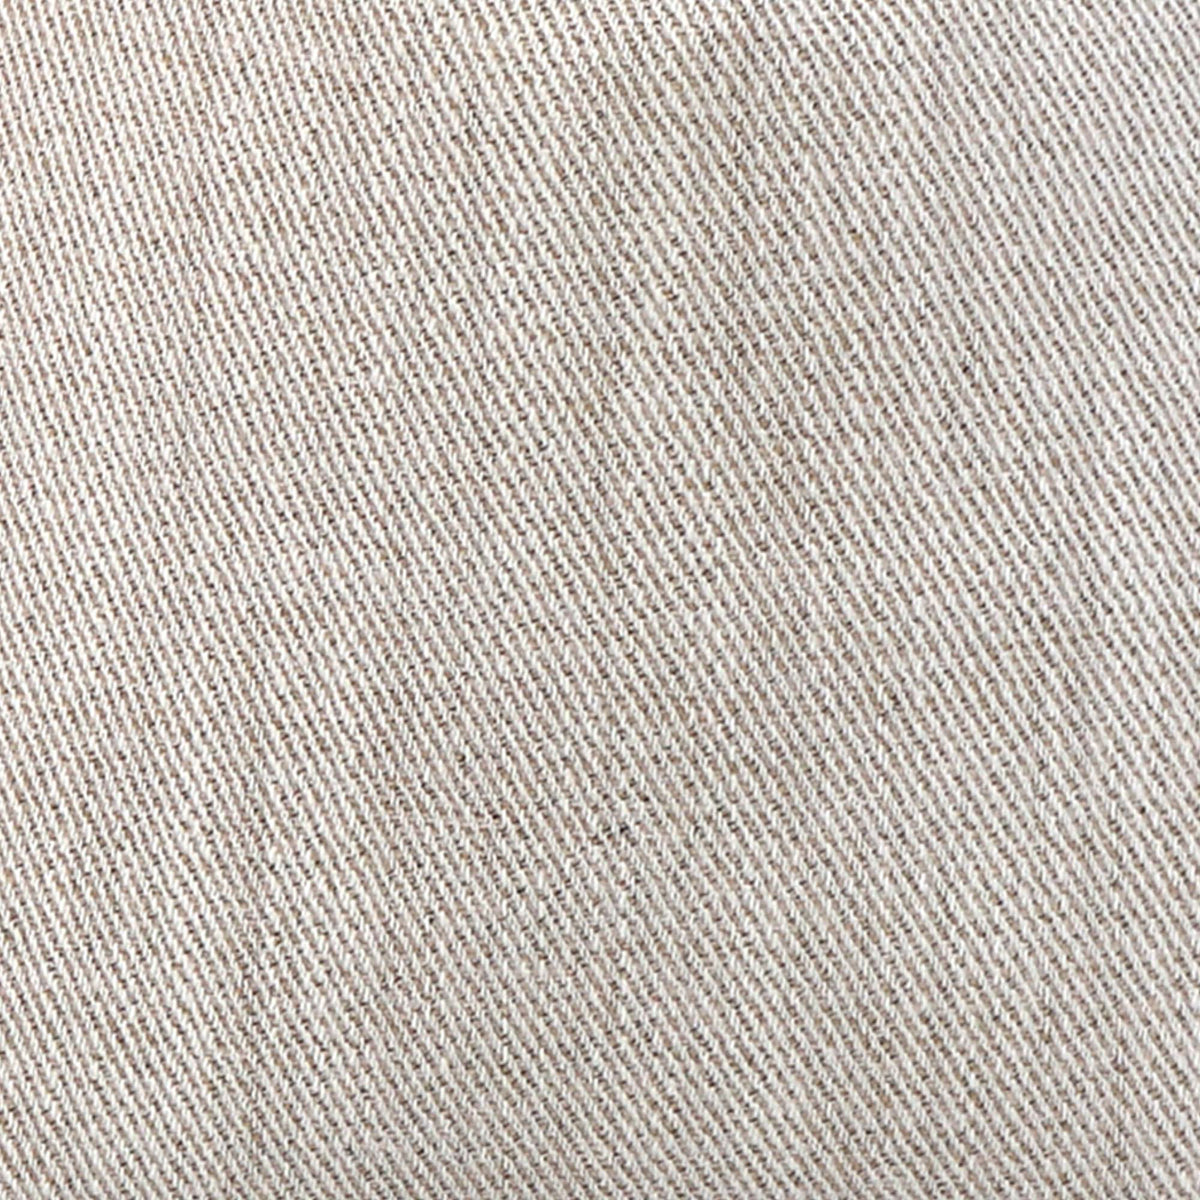 Everett Performance Twill Natural / 4x4 inch Fabric Swatch